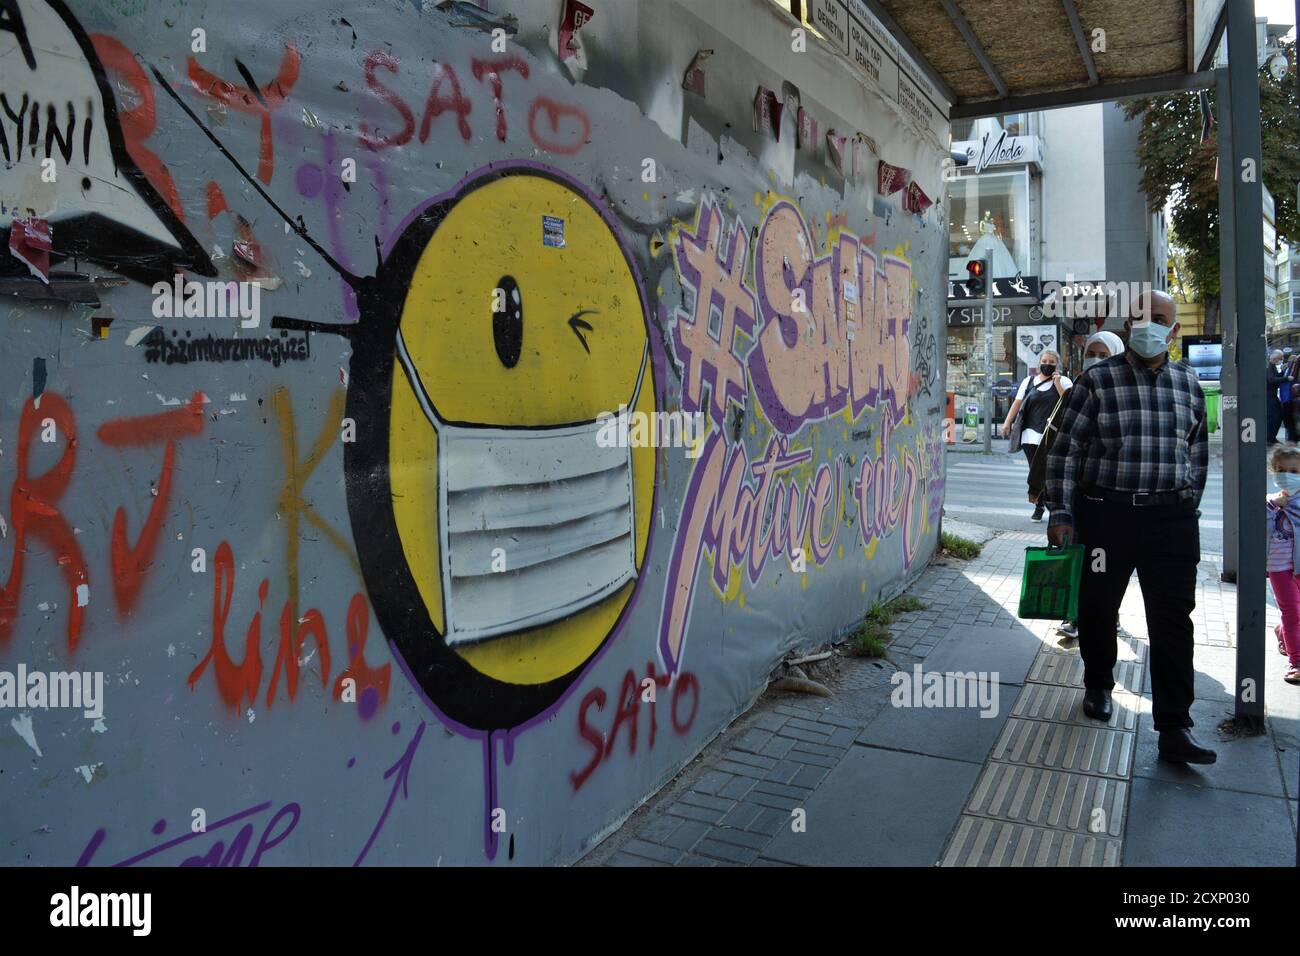 Ankara, Turkey. 1st Oct, 2020. A man wearing a protective face mask walks past a graffiti in Cankaya district amid the coronavirus (COVID-19) outbreak. Turkish Minister of Health Fahrettin Koca admitted on September 30 that asymptomatic cases of the coronavirus are deliberately excluded from daily reports. The minister's statement came after the revelation of a document showing nearly 20 times more cases than the official daily figures. Credit: Altan Gocher/ZUMA Wire/Alamy Live News Stock Photo